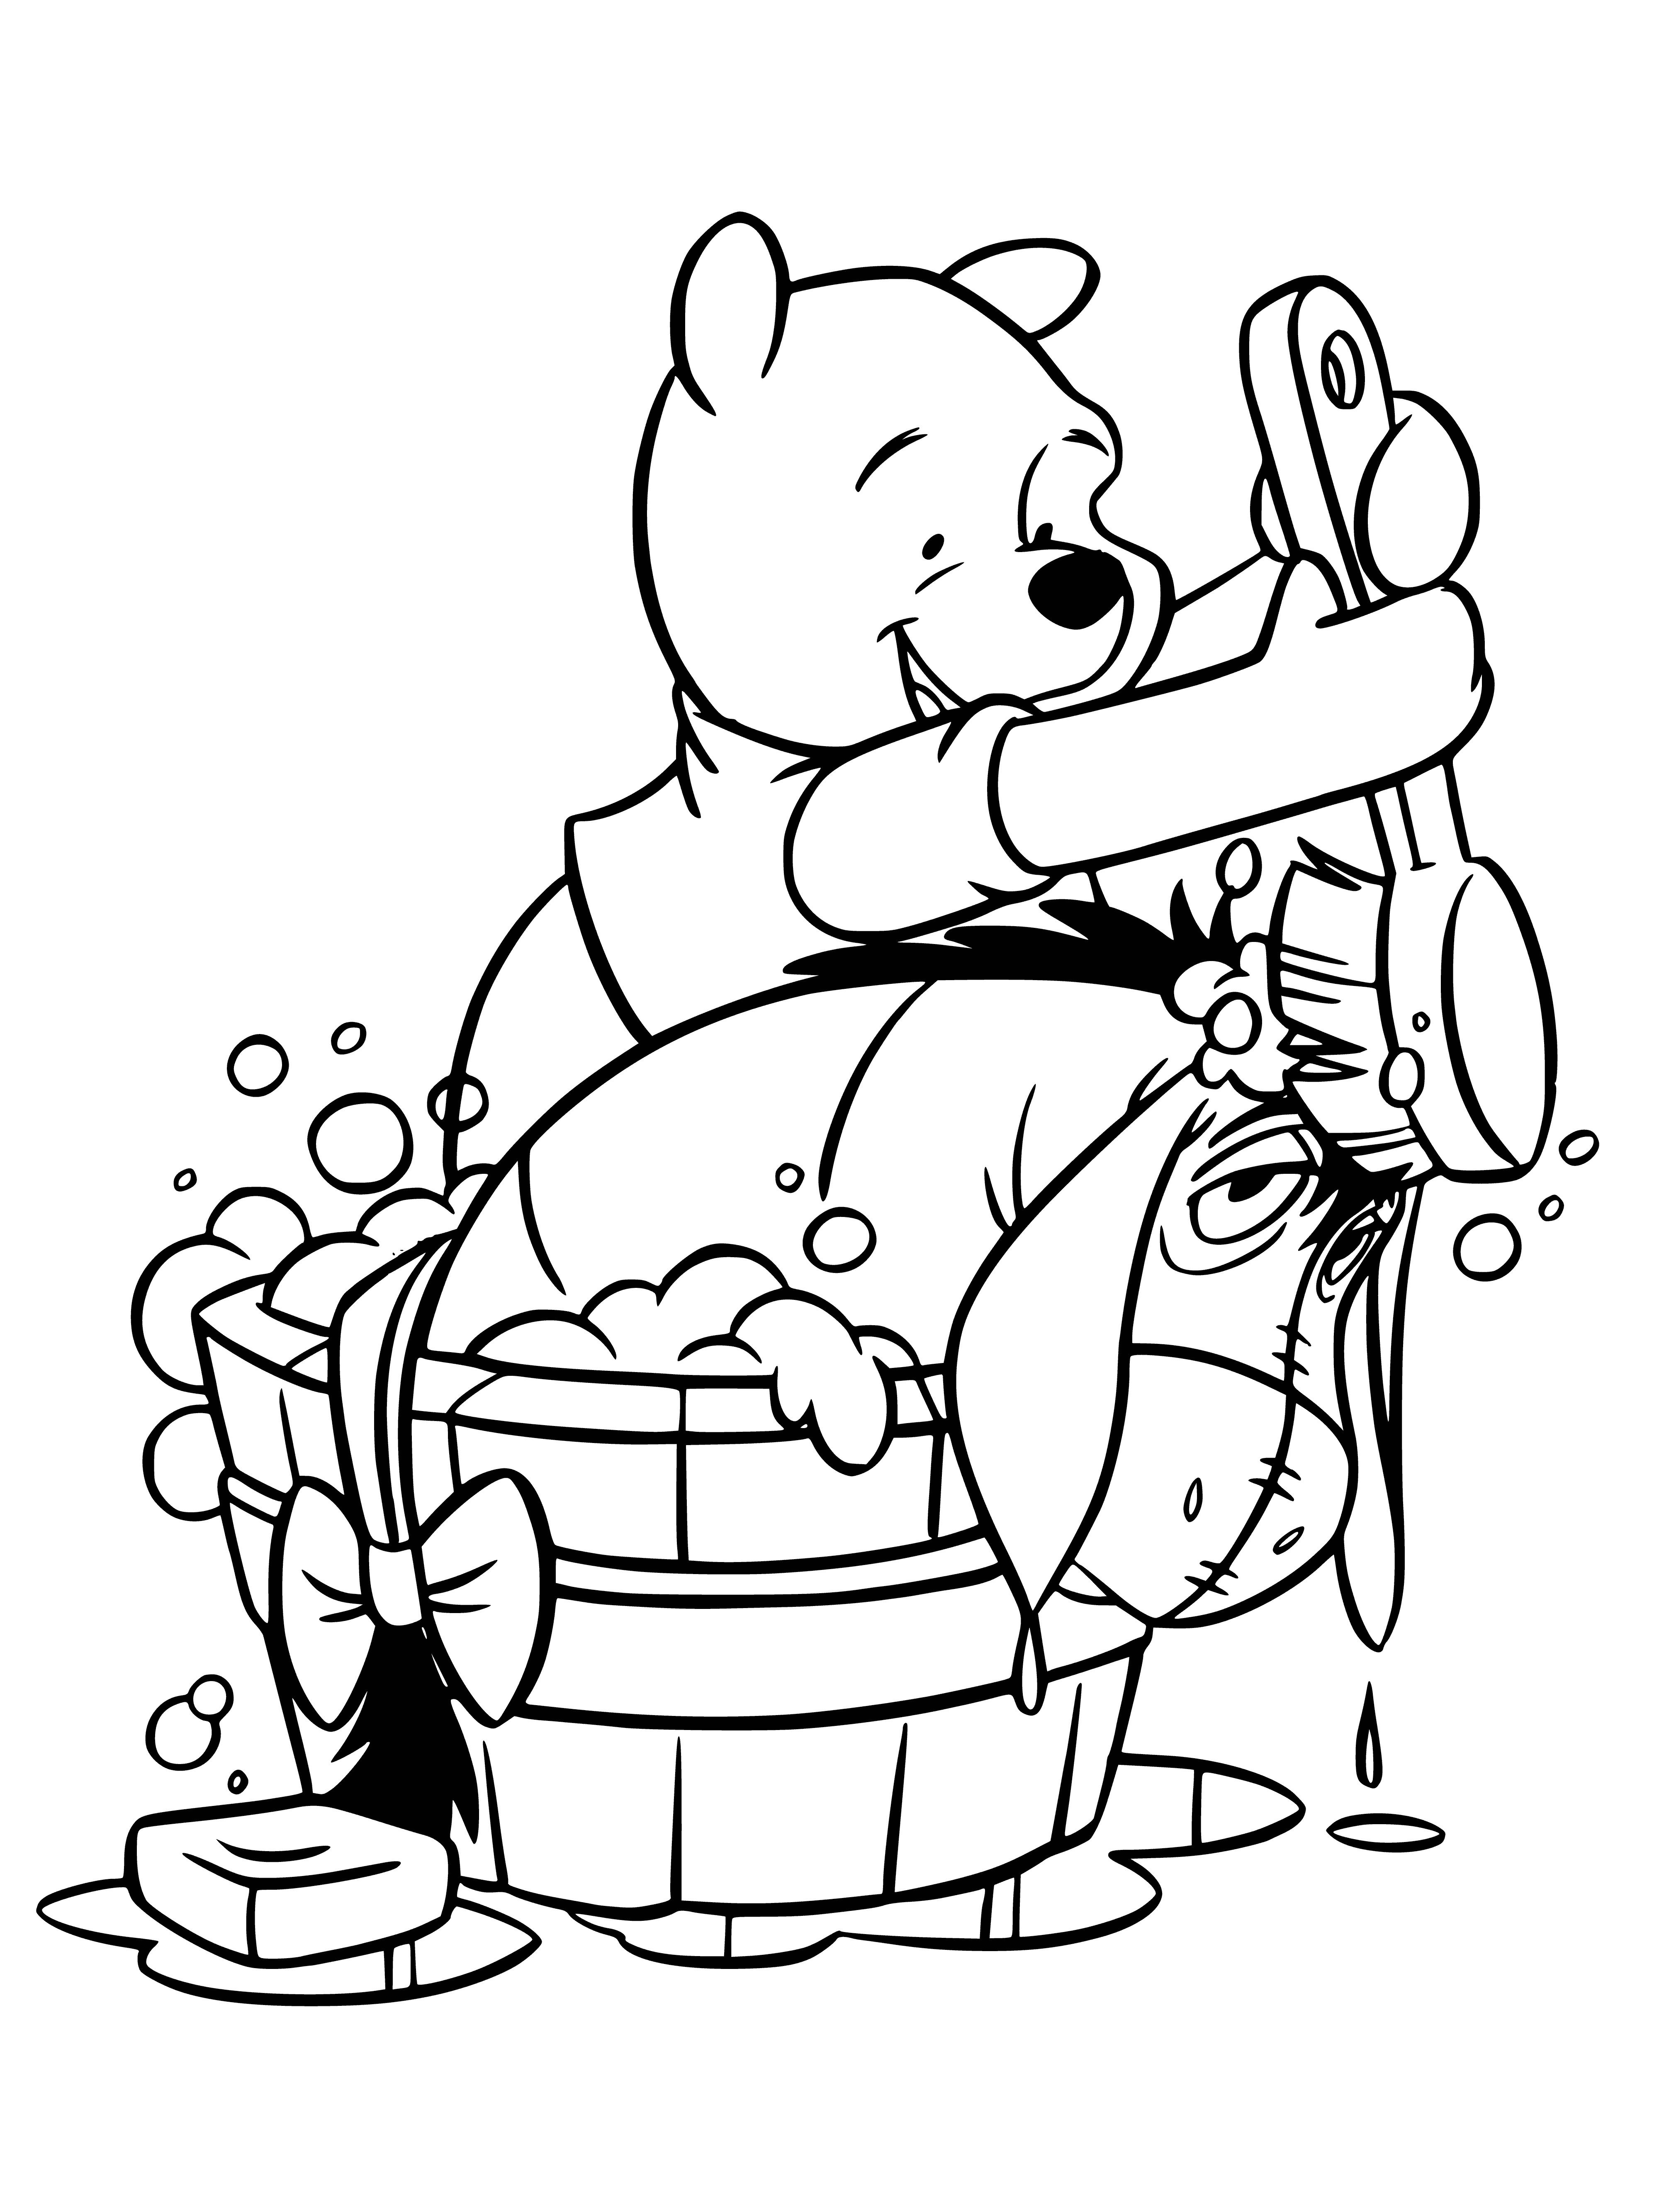 coloring page: A donkey in a bathtub, standing in water with a yellow towel nearby. #relaxing #coloringpage